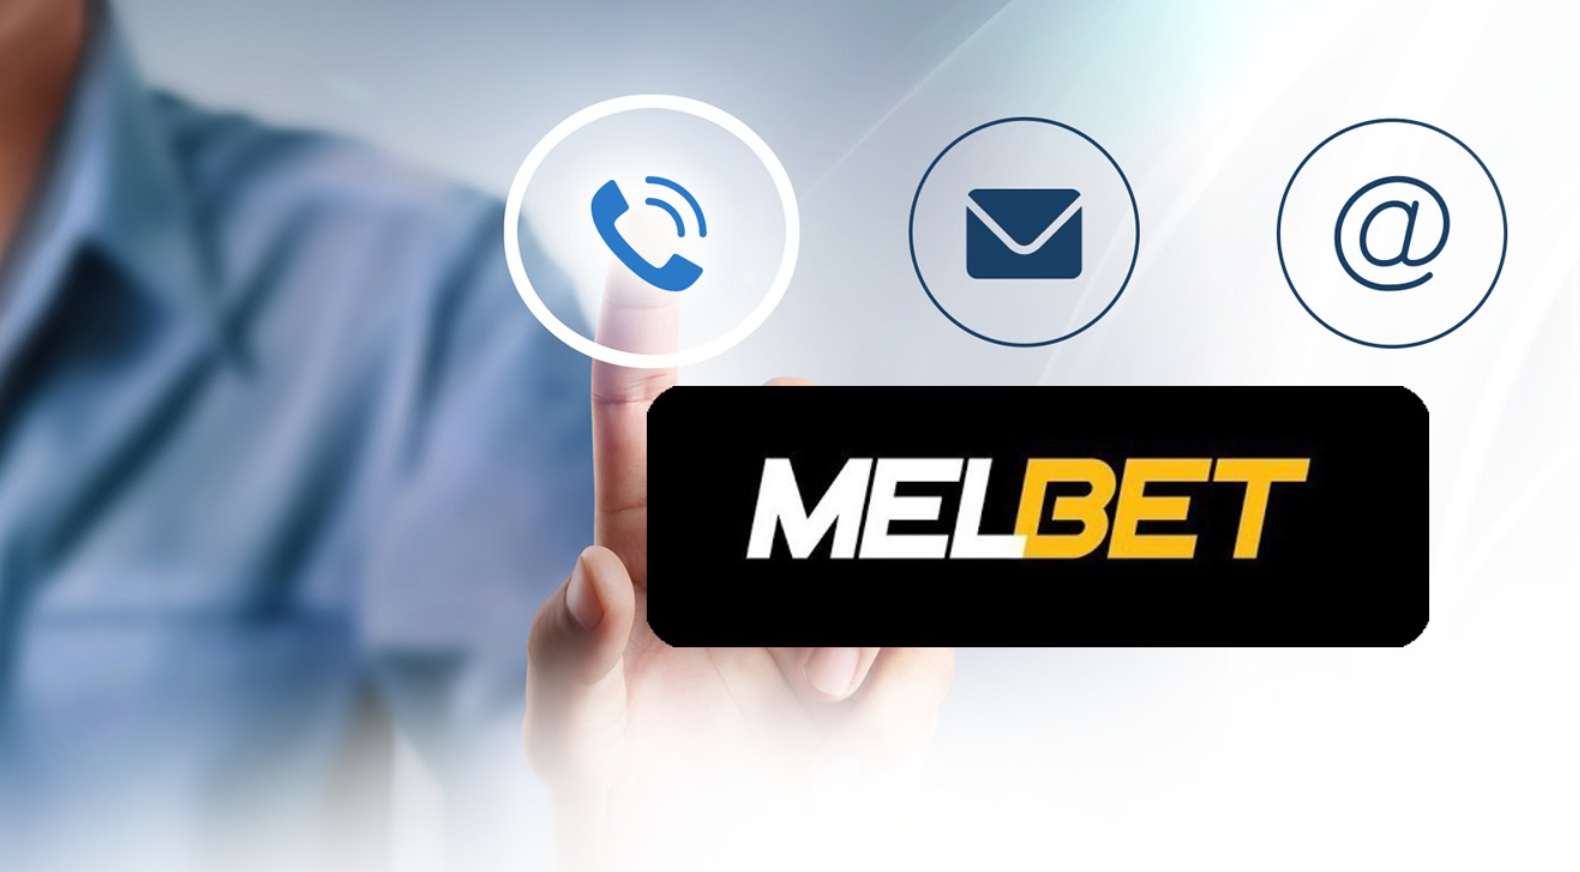 How to use promo code in Melbet?